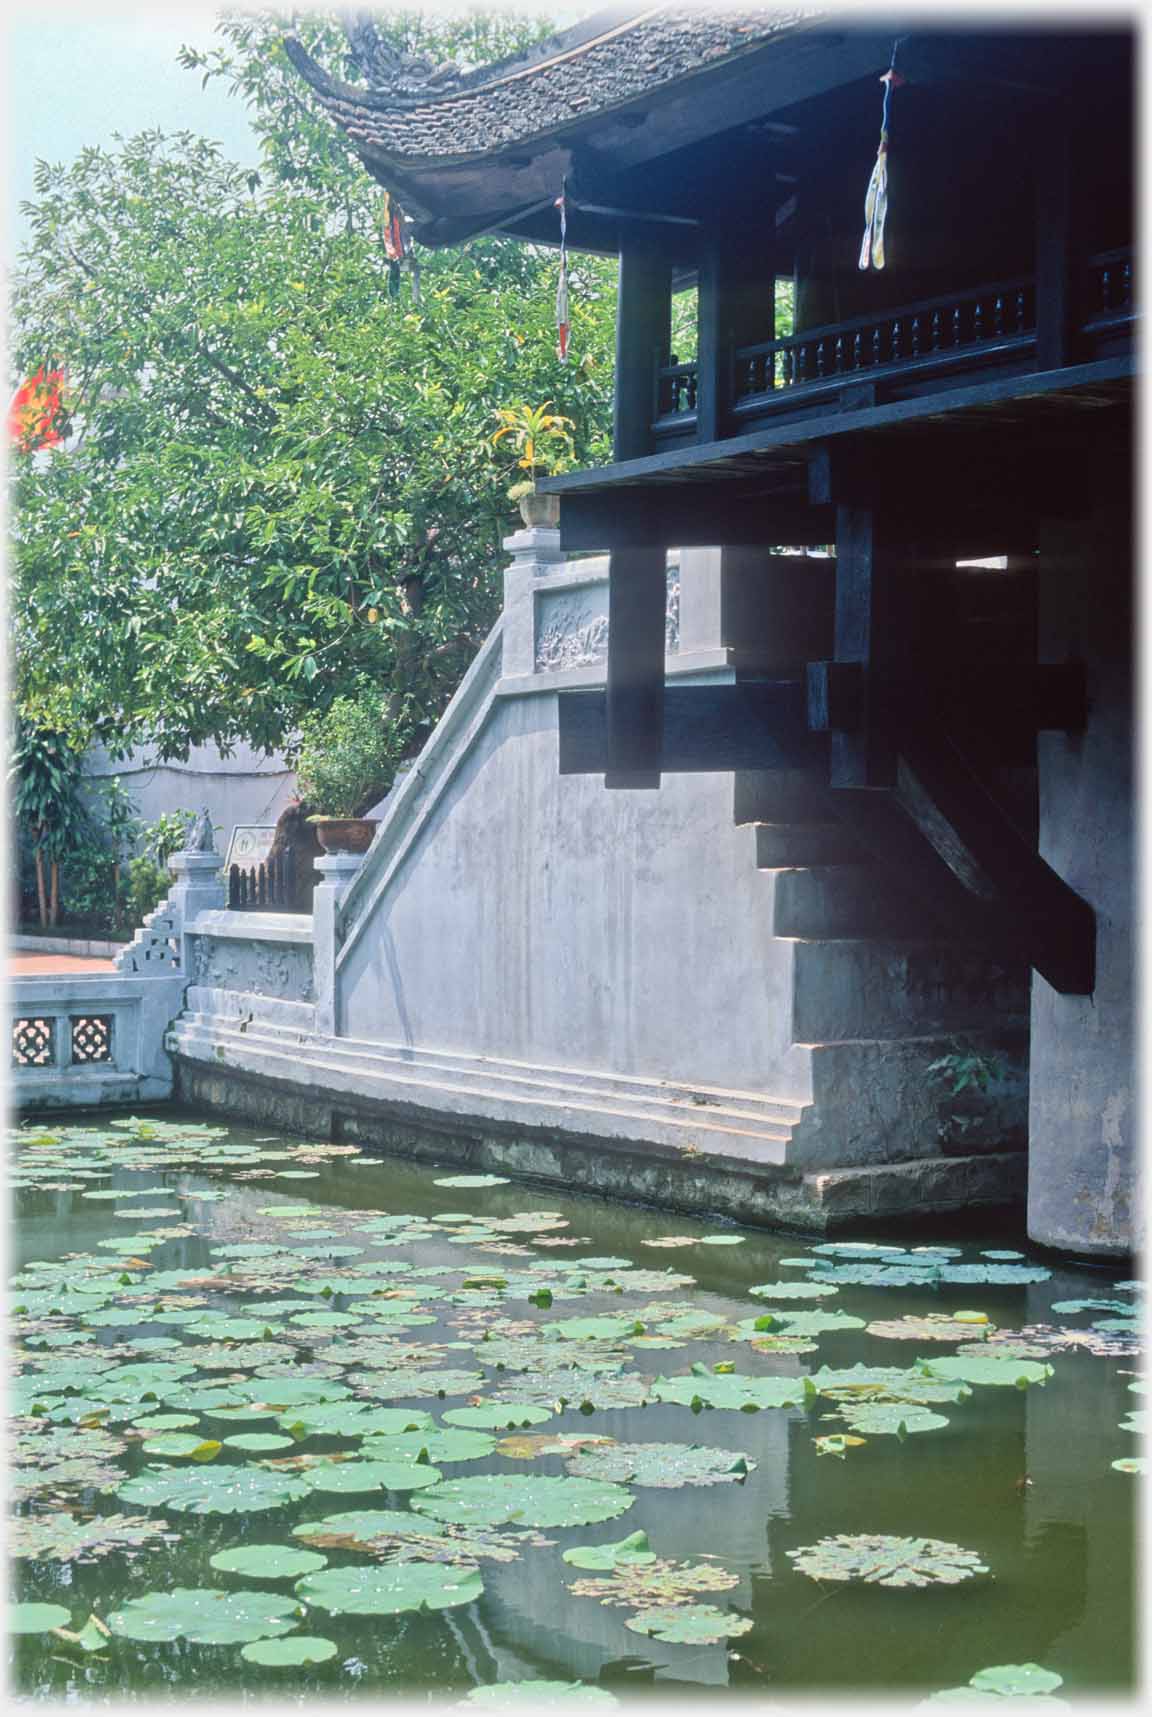 Waterlilies on pool in front of steps leading to pagoda.